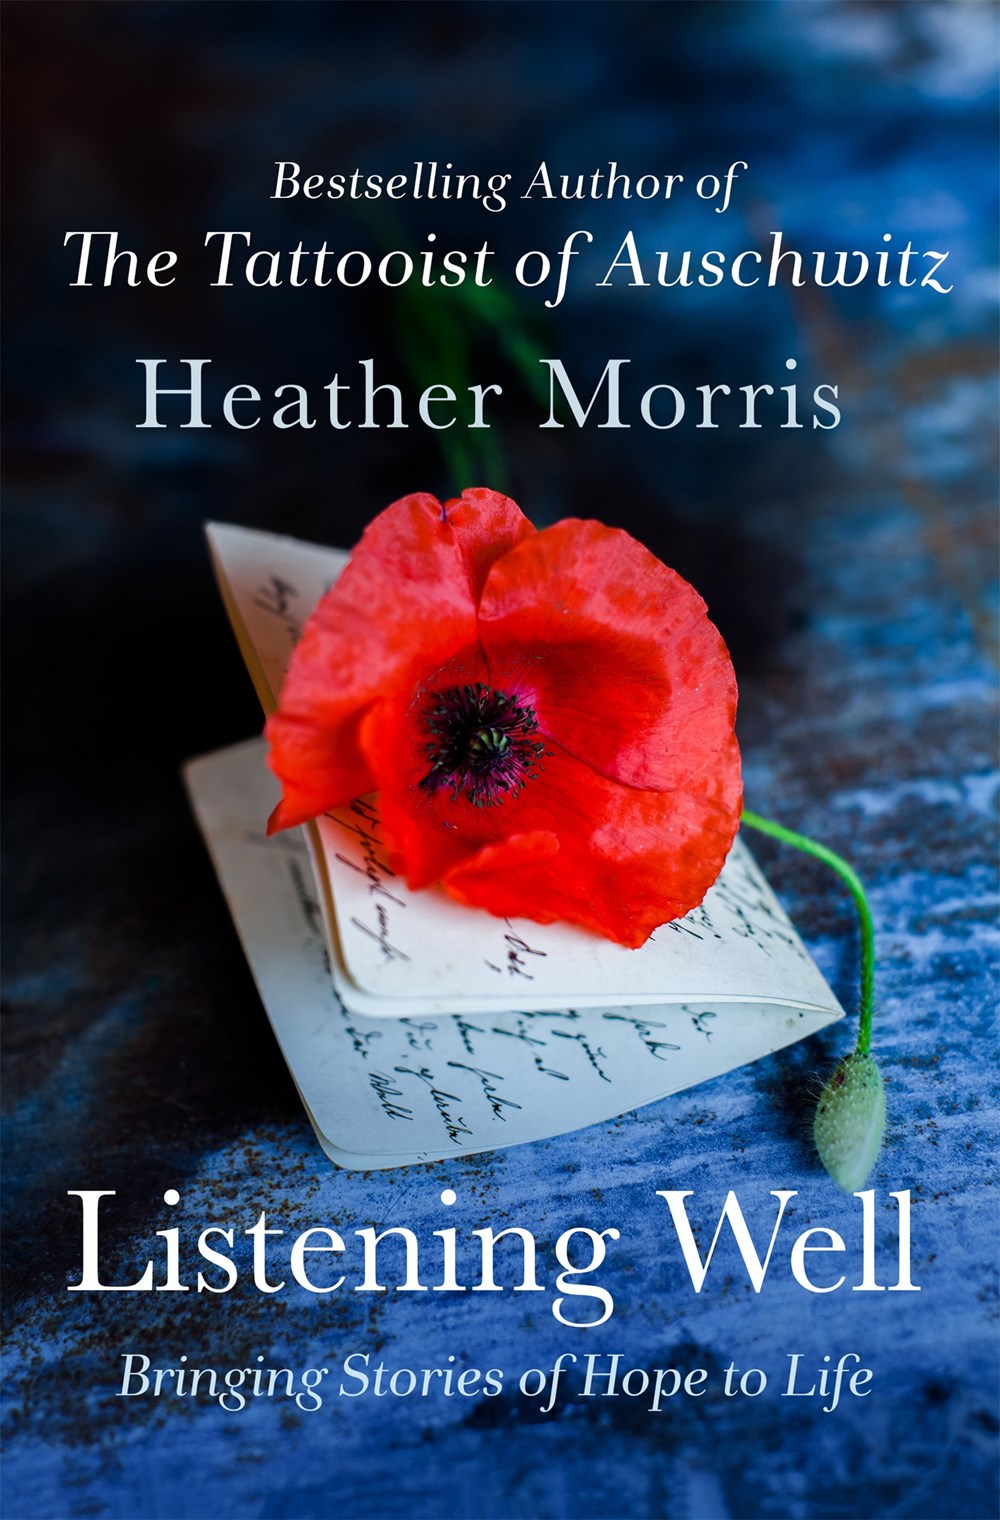 Listening Well: Bringing Stories of Hope to Life